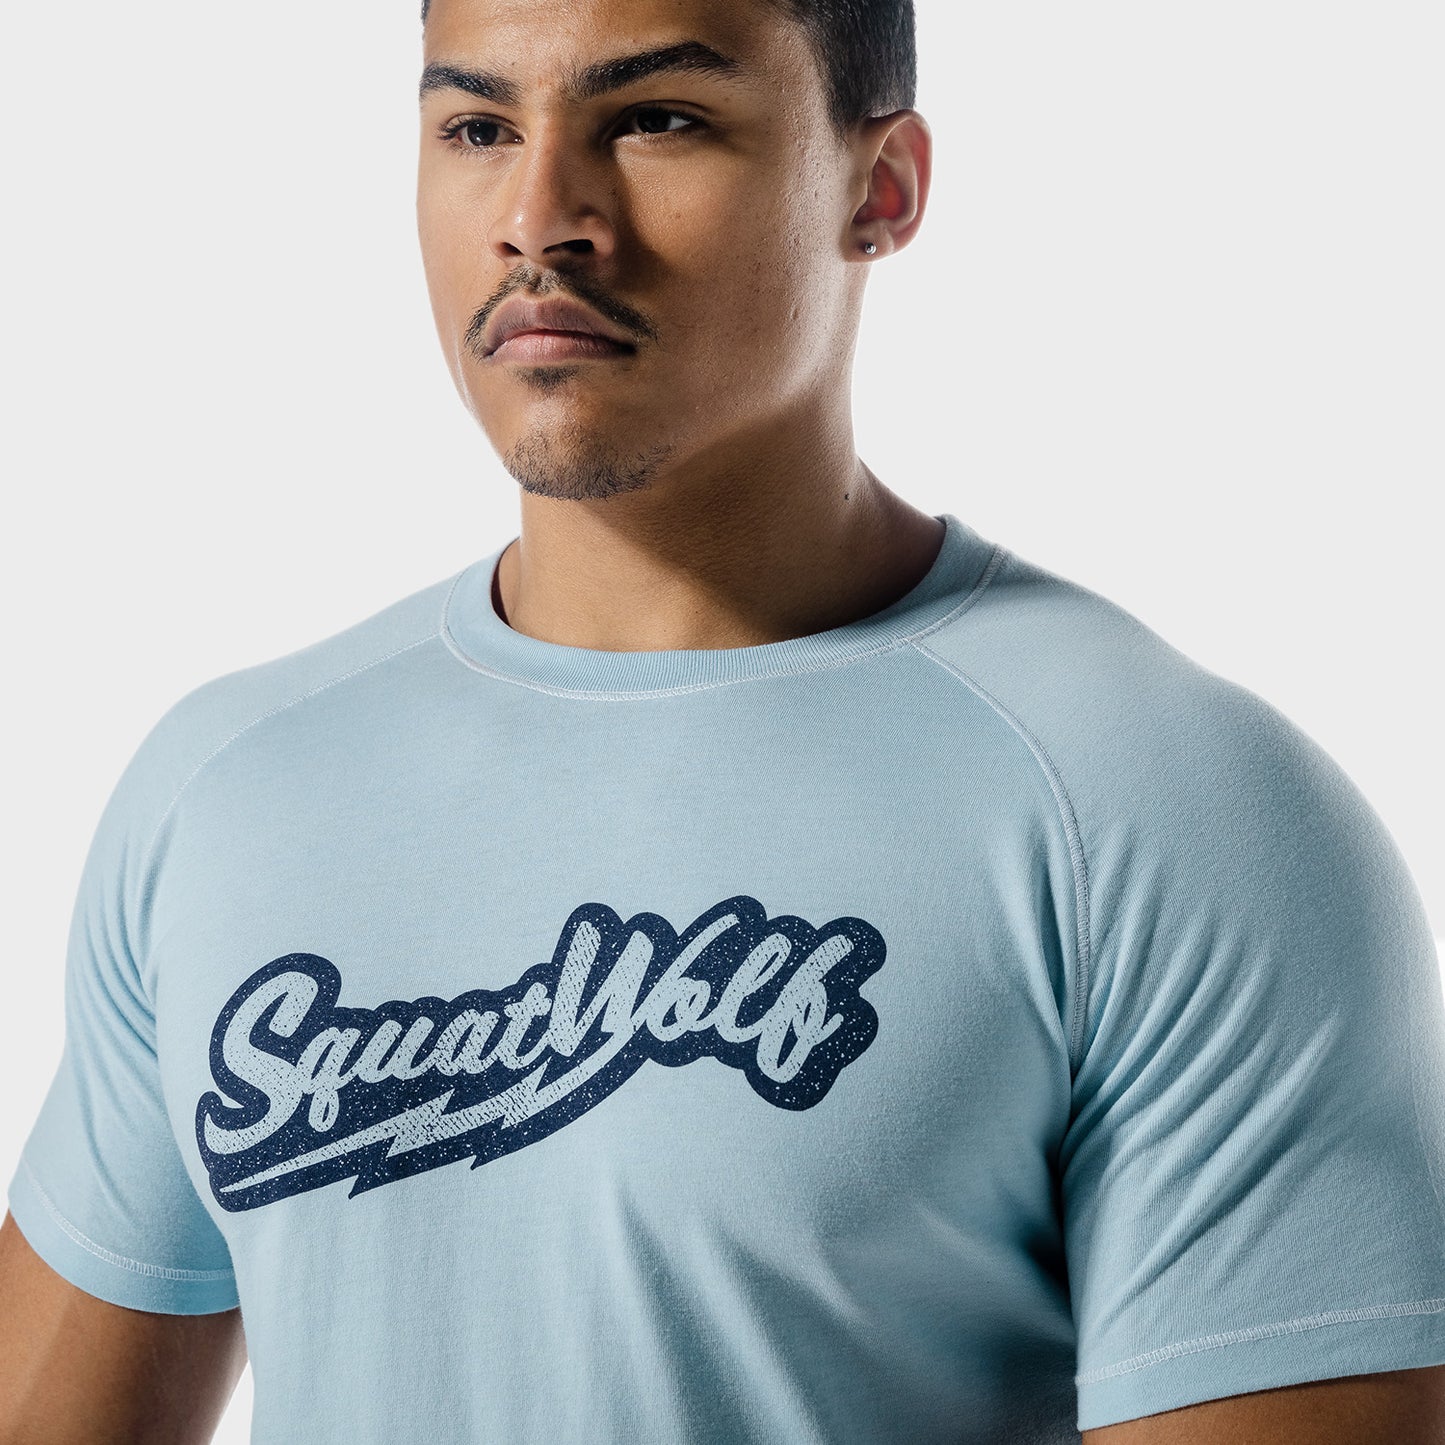 squatwolf-gym-t-shirts-golden-era-one-up-t-shirt-bluebell-workout-clothes-for-men